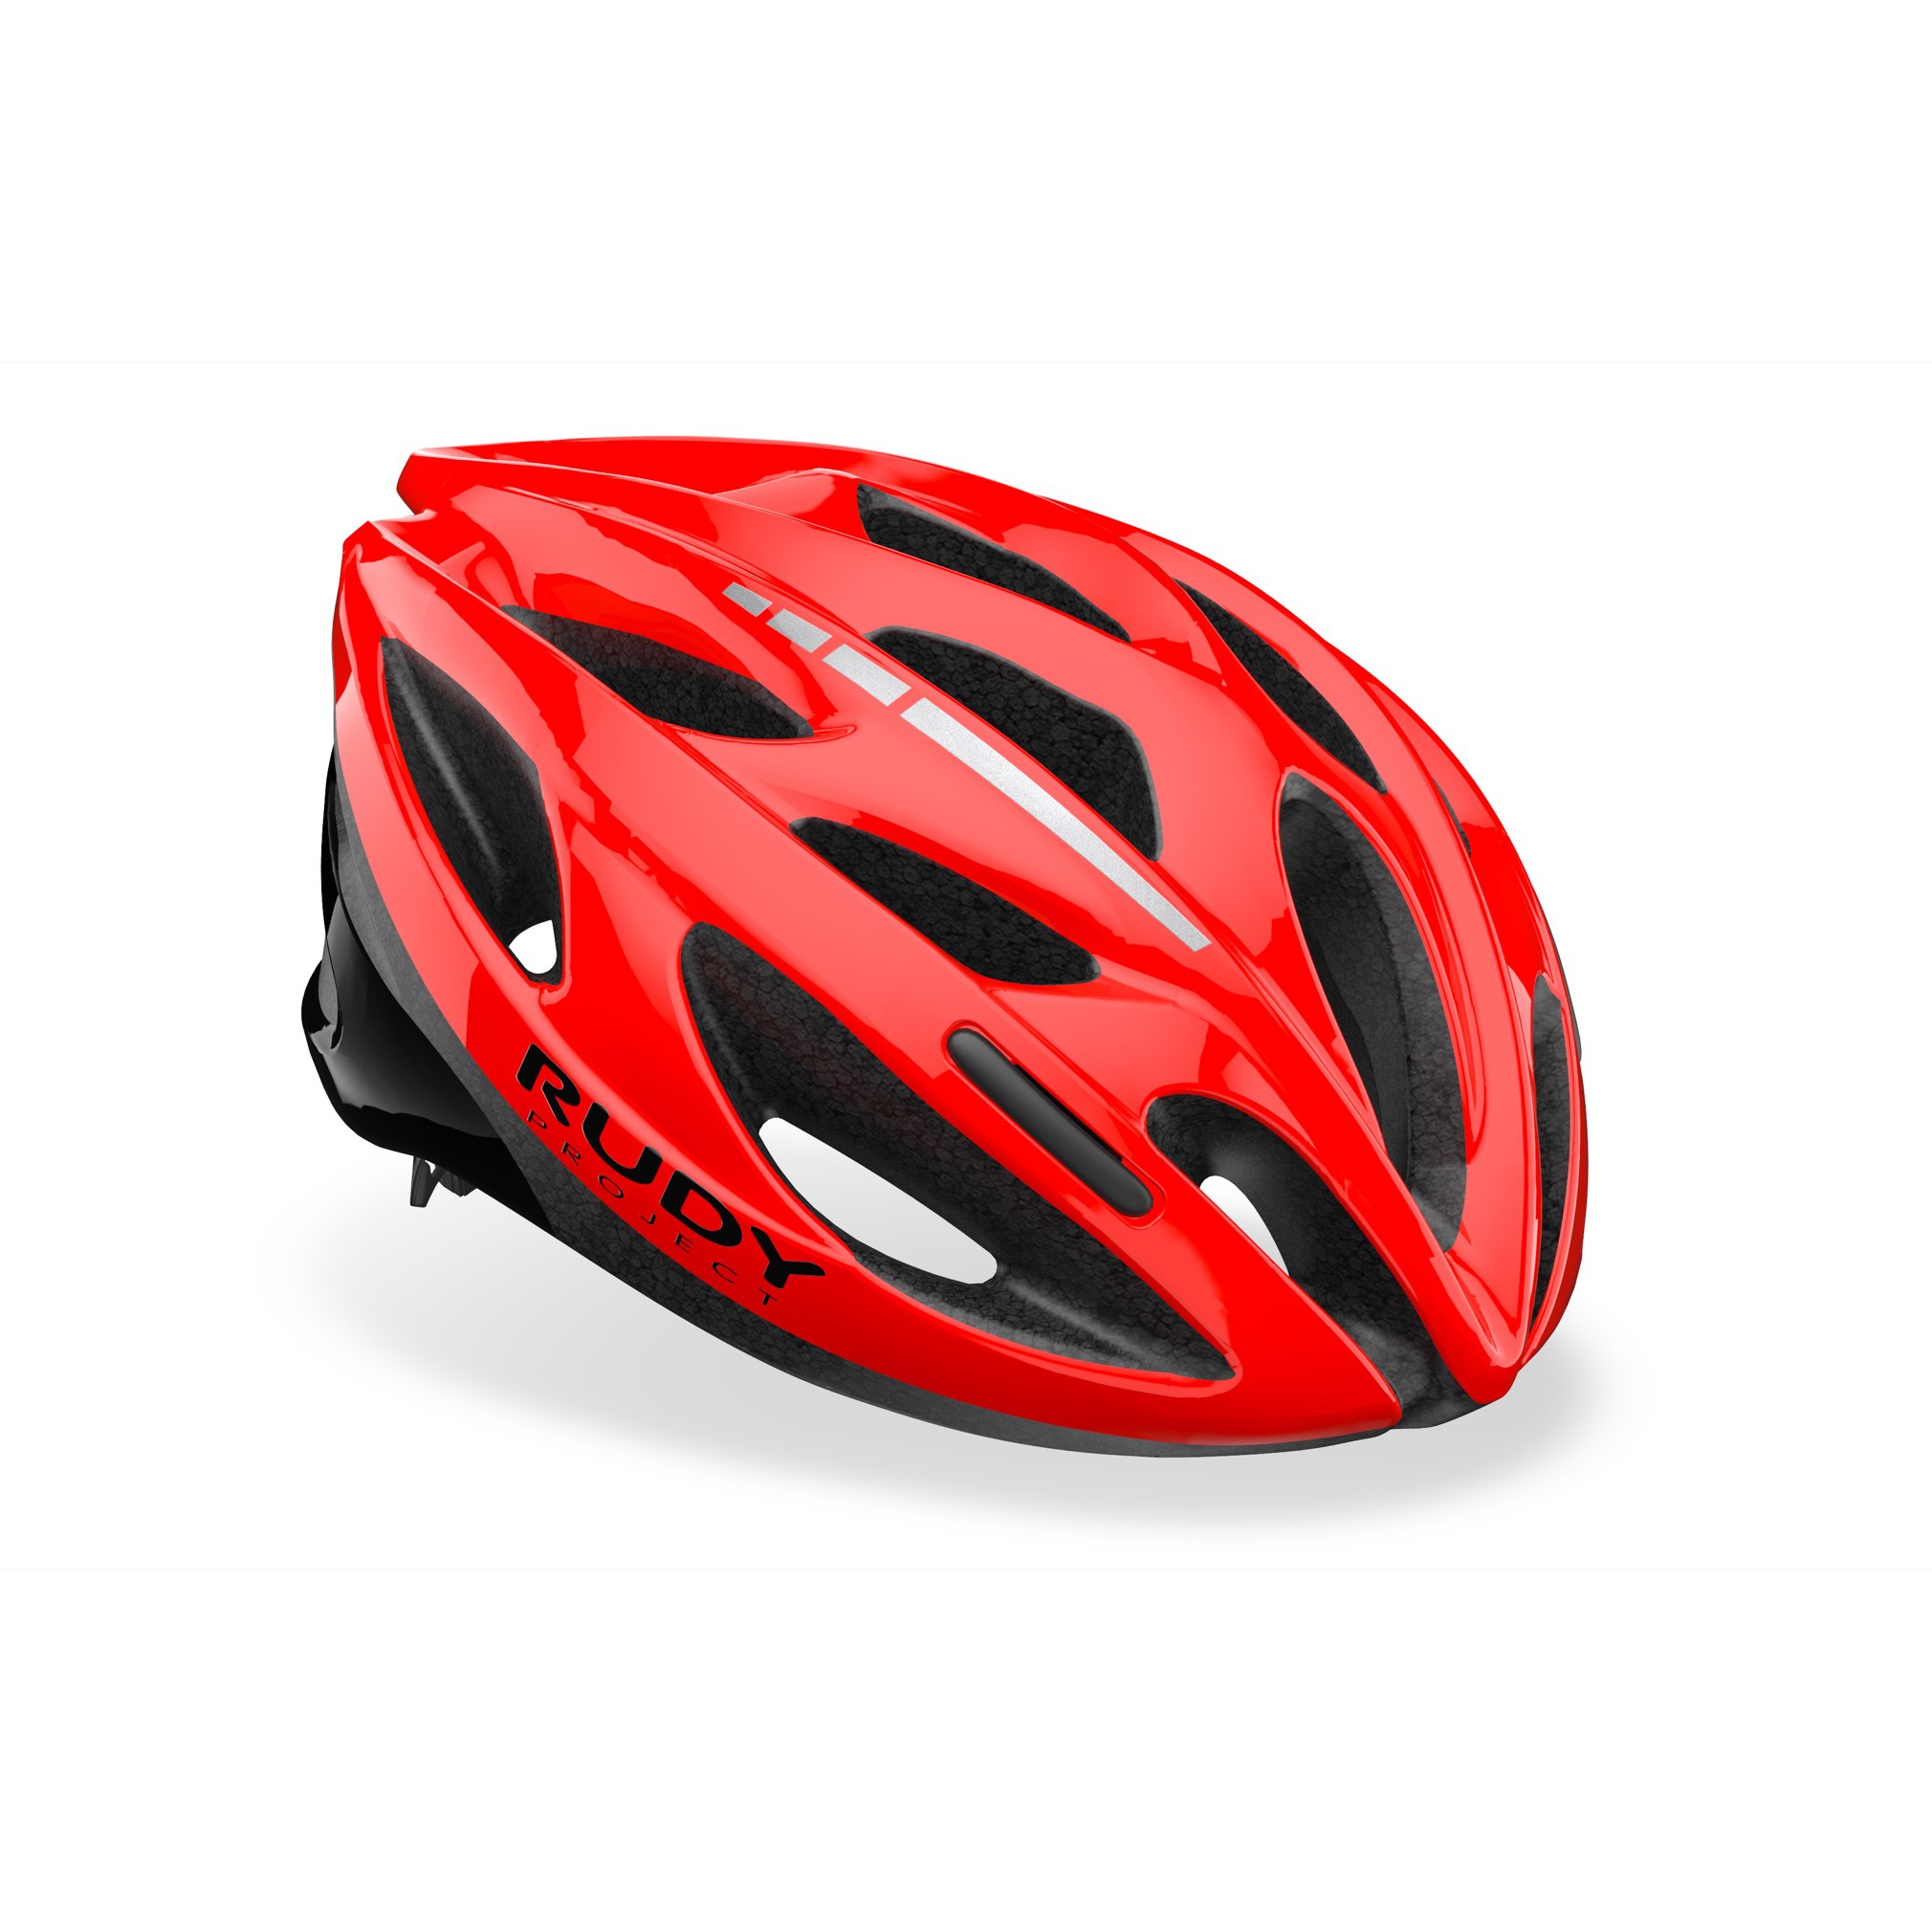 Casque vélo Rudy Project Zumy